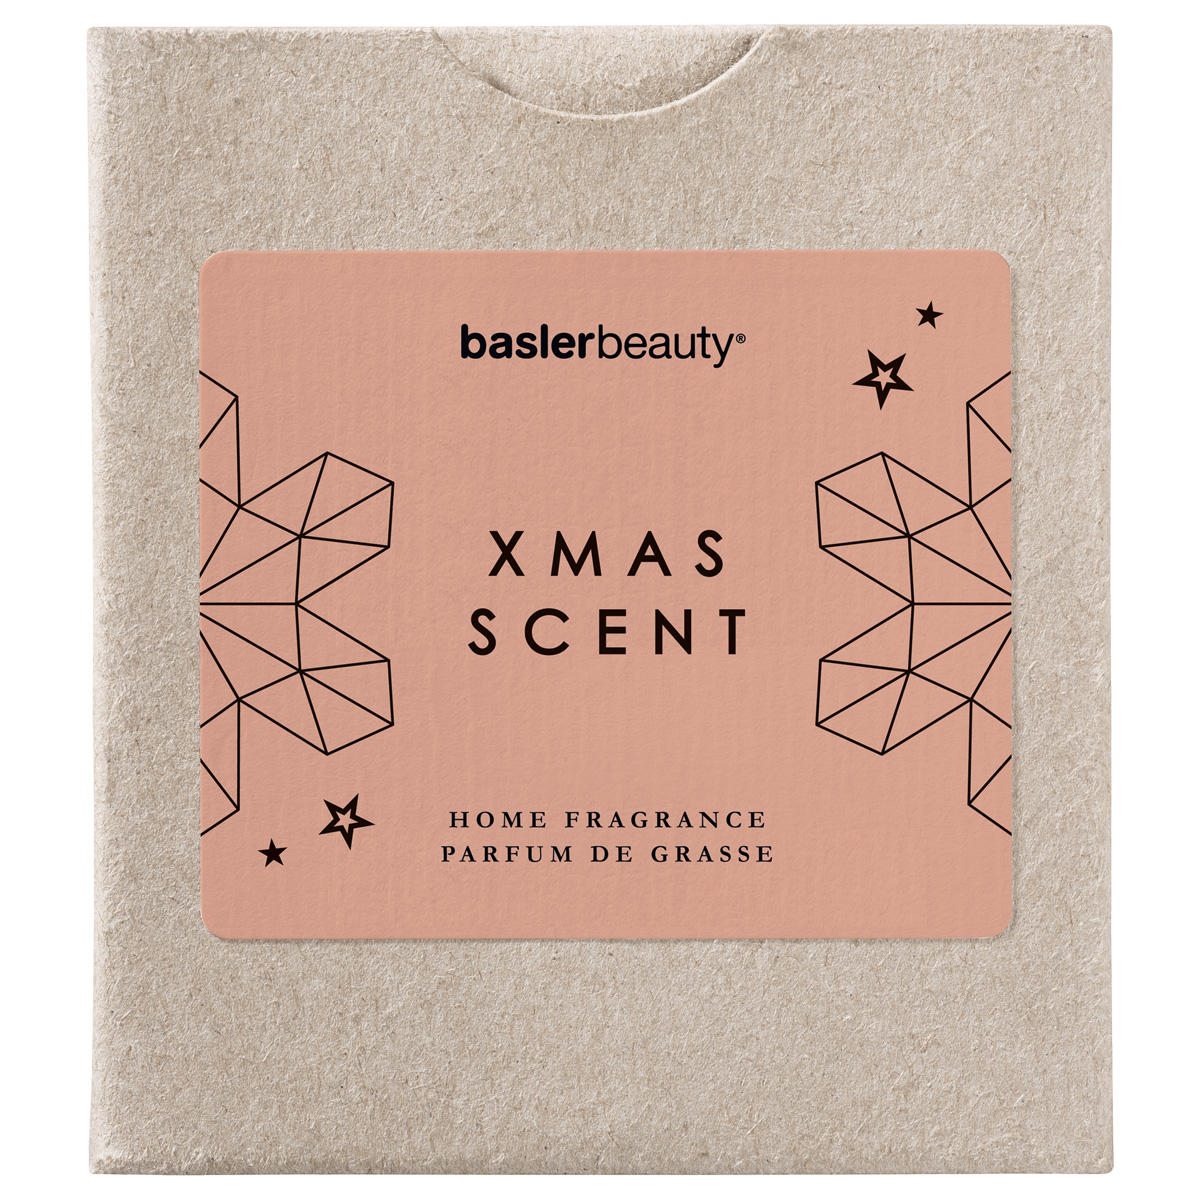 baslerbeauty Scented candle XMAS SCENT 160 g - 2